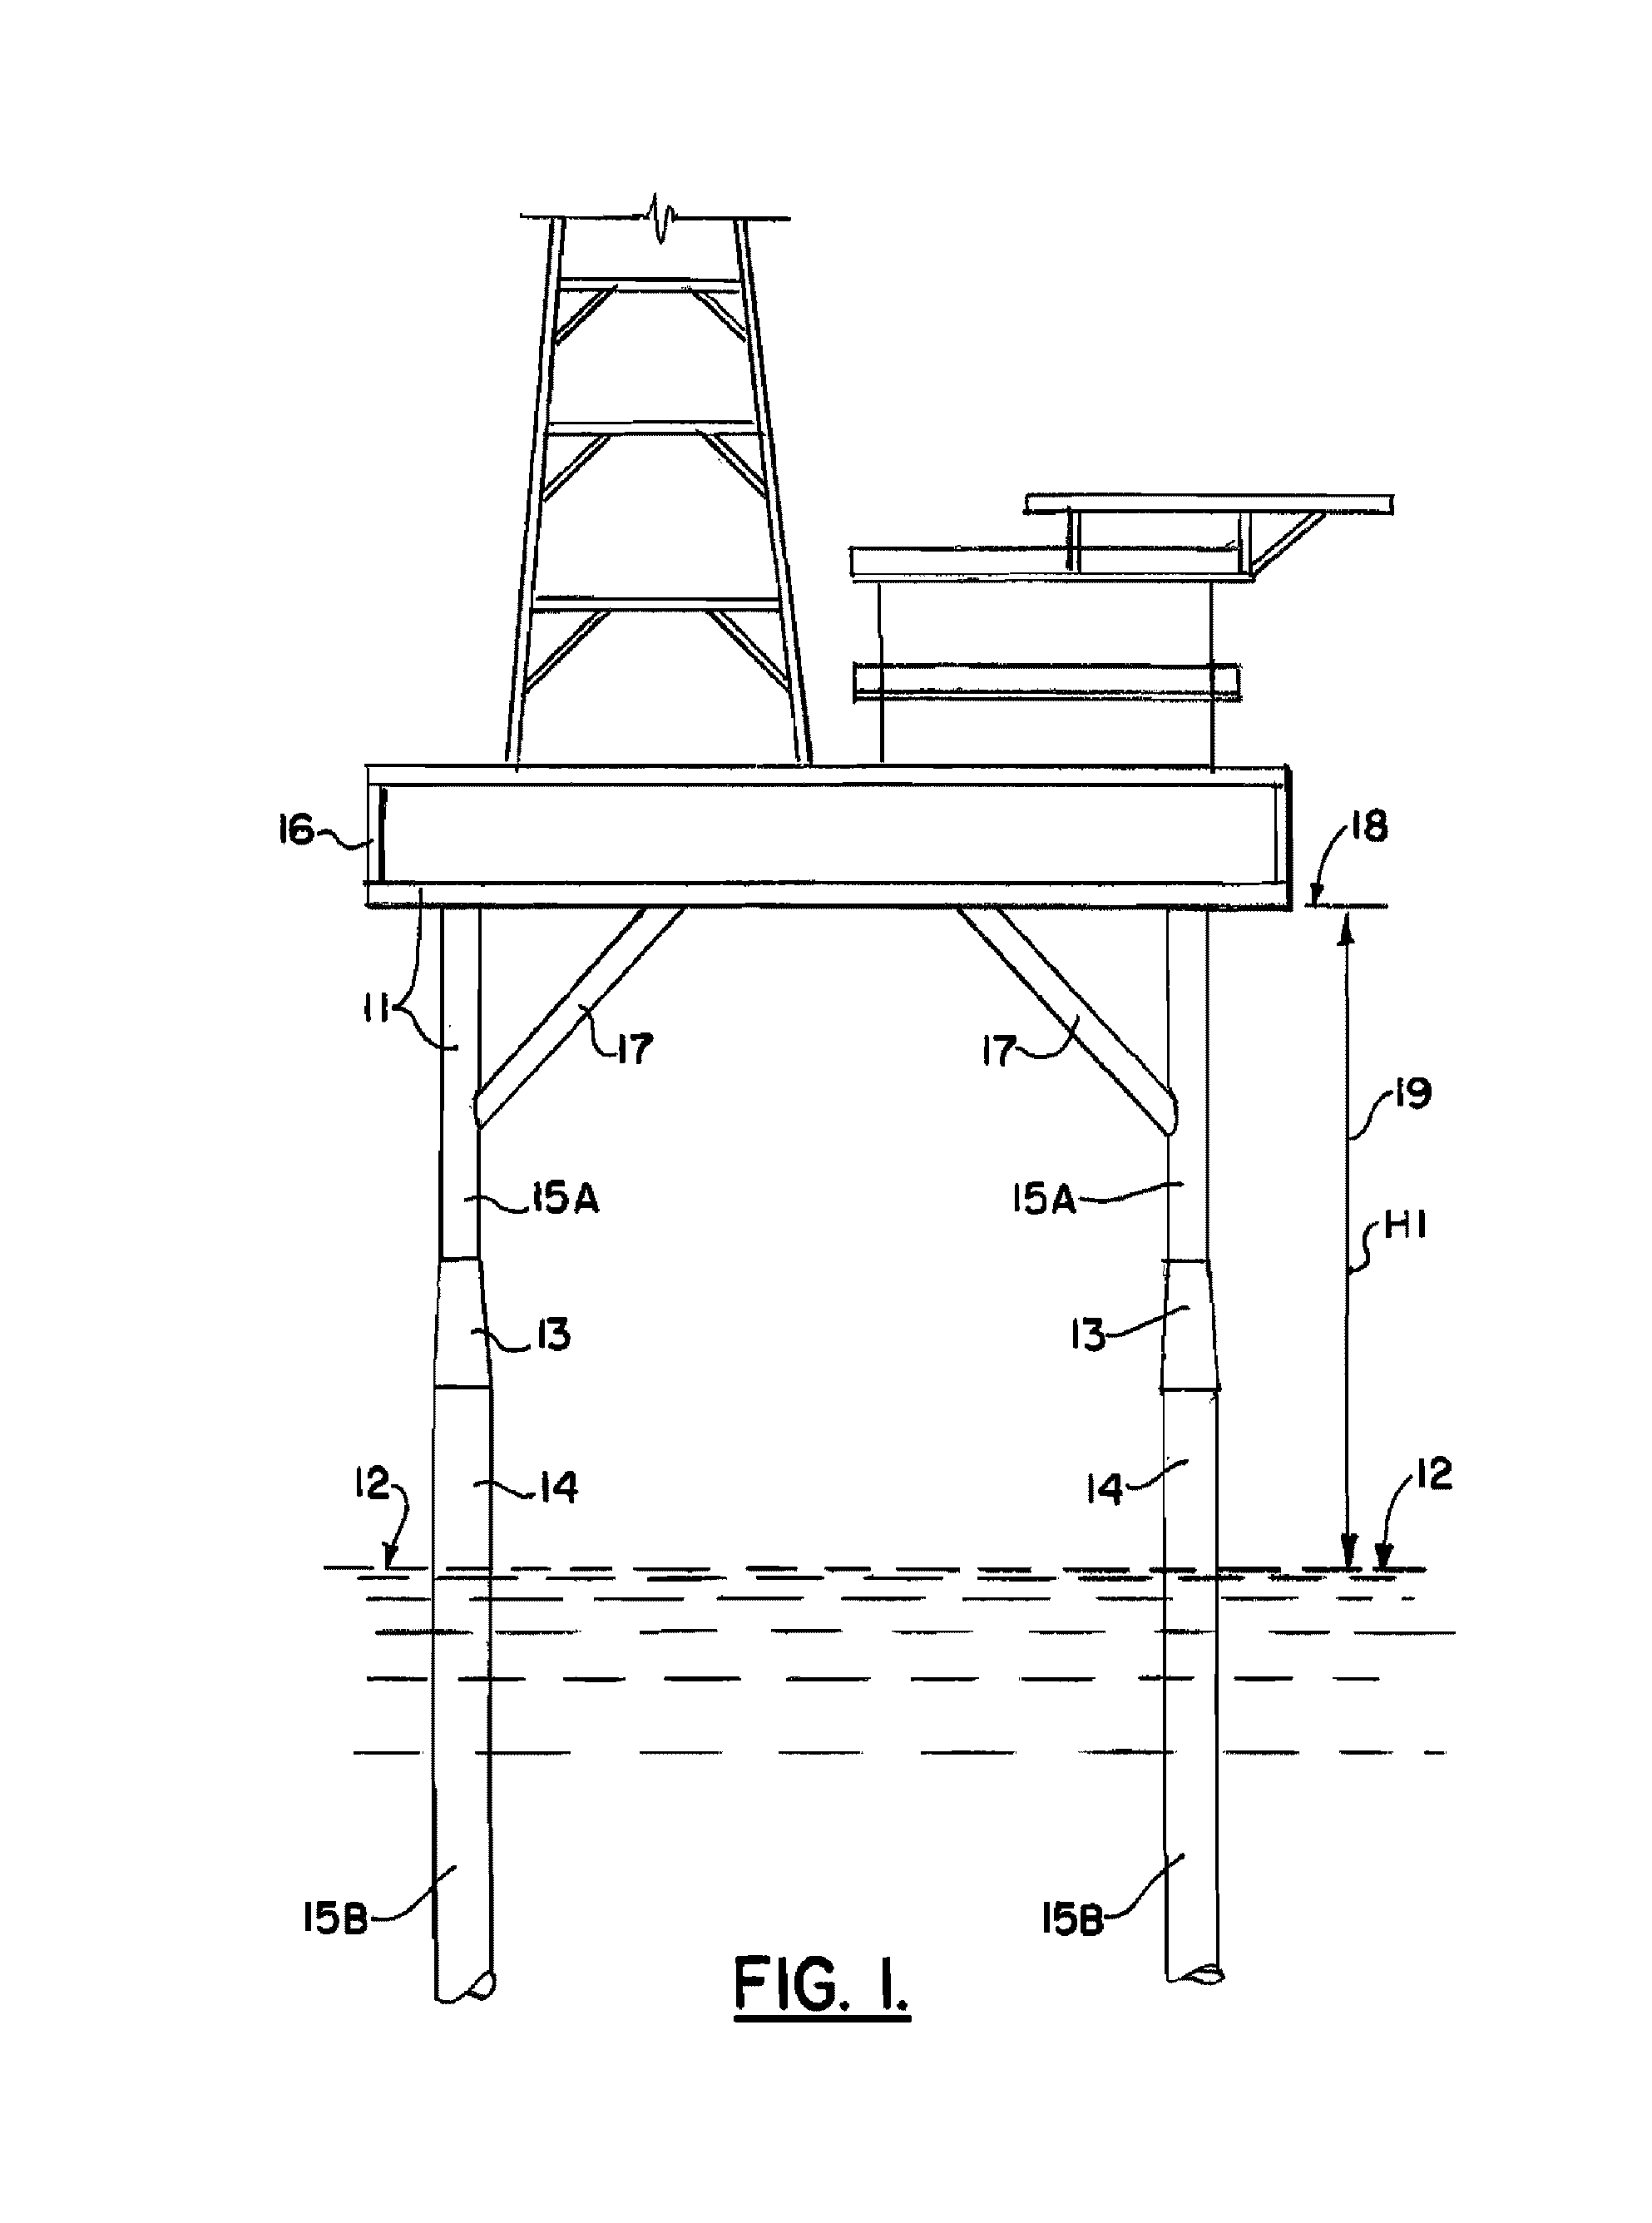 Method and apparatus for elevating a marine platform